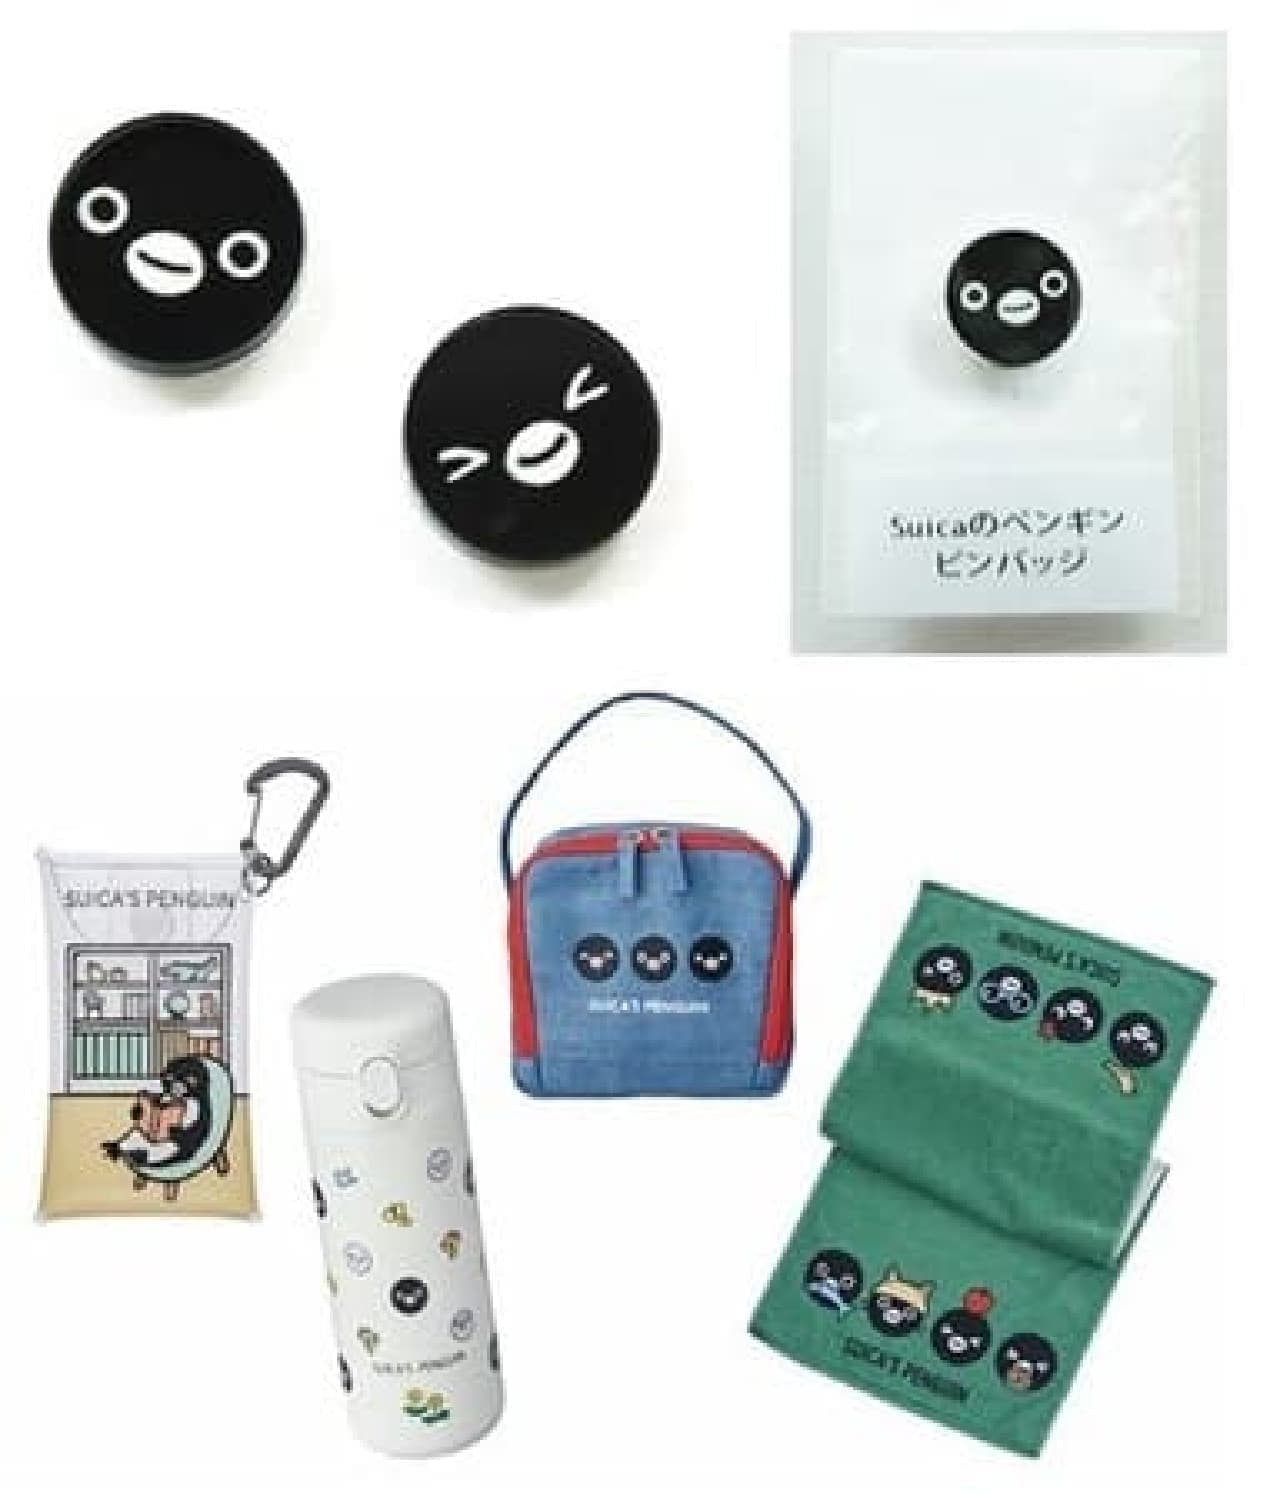 "Suica 20th Anniversary Suica's Penguing Goods Fair" Ecute etc .-- Lots of new products! Pin badge novelty